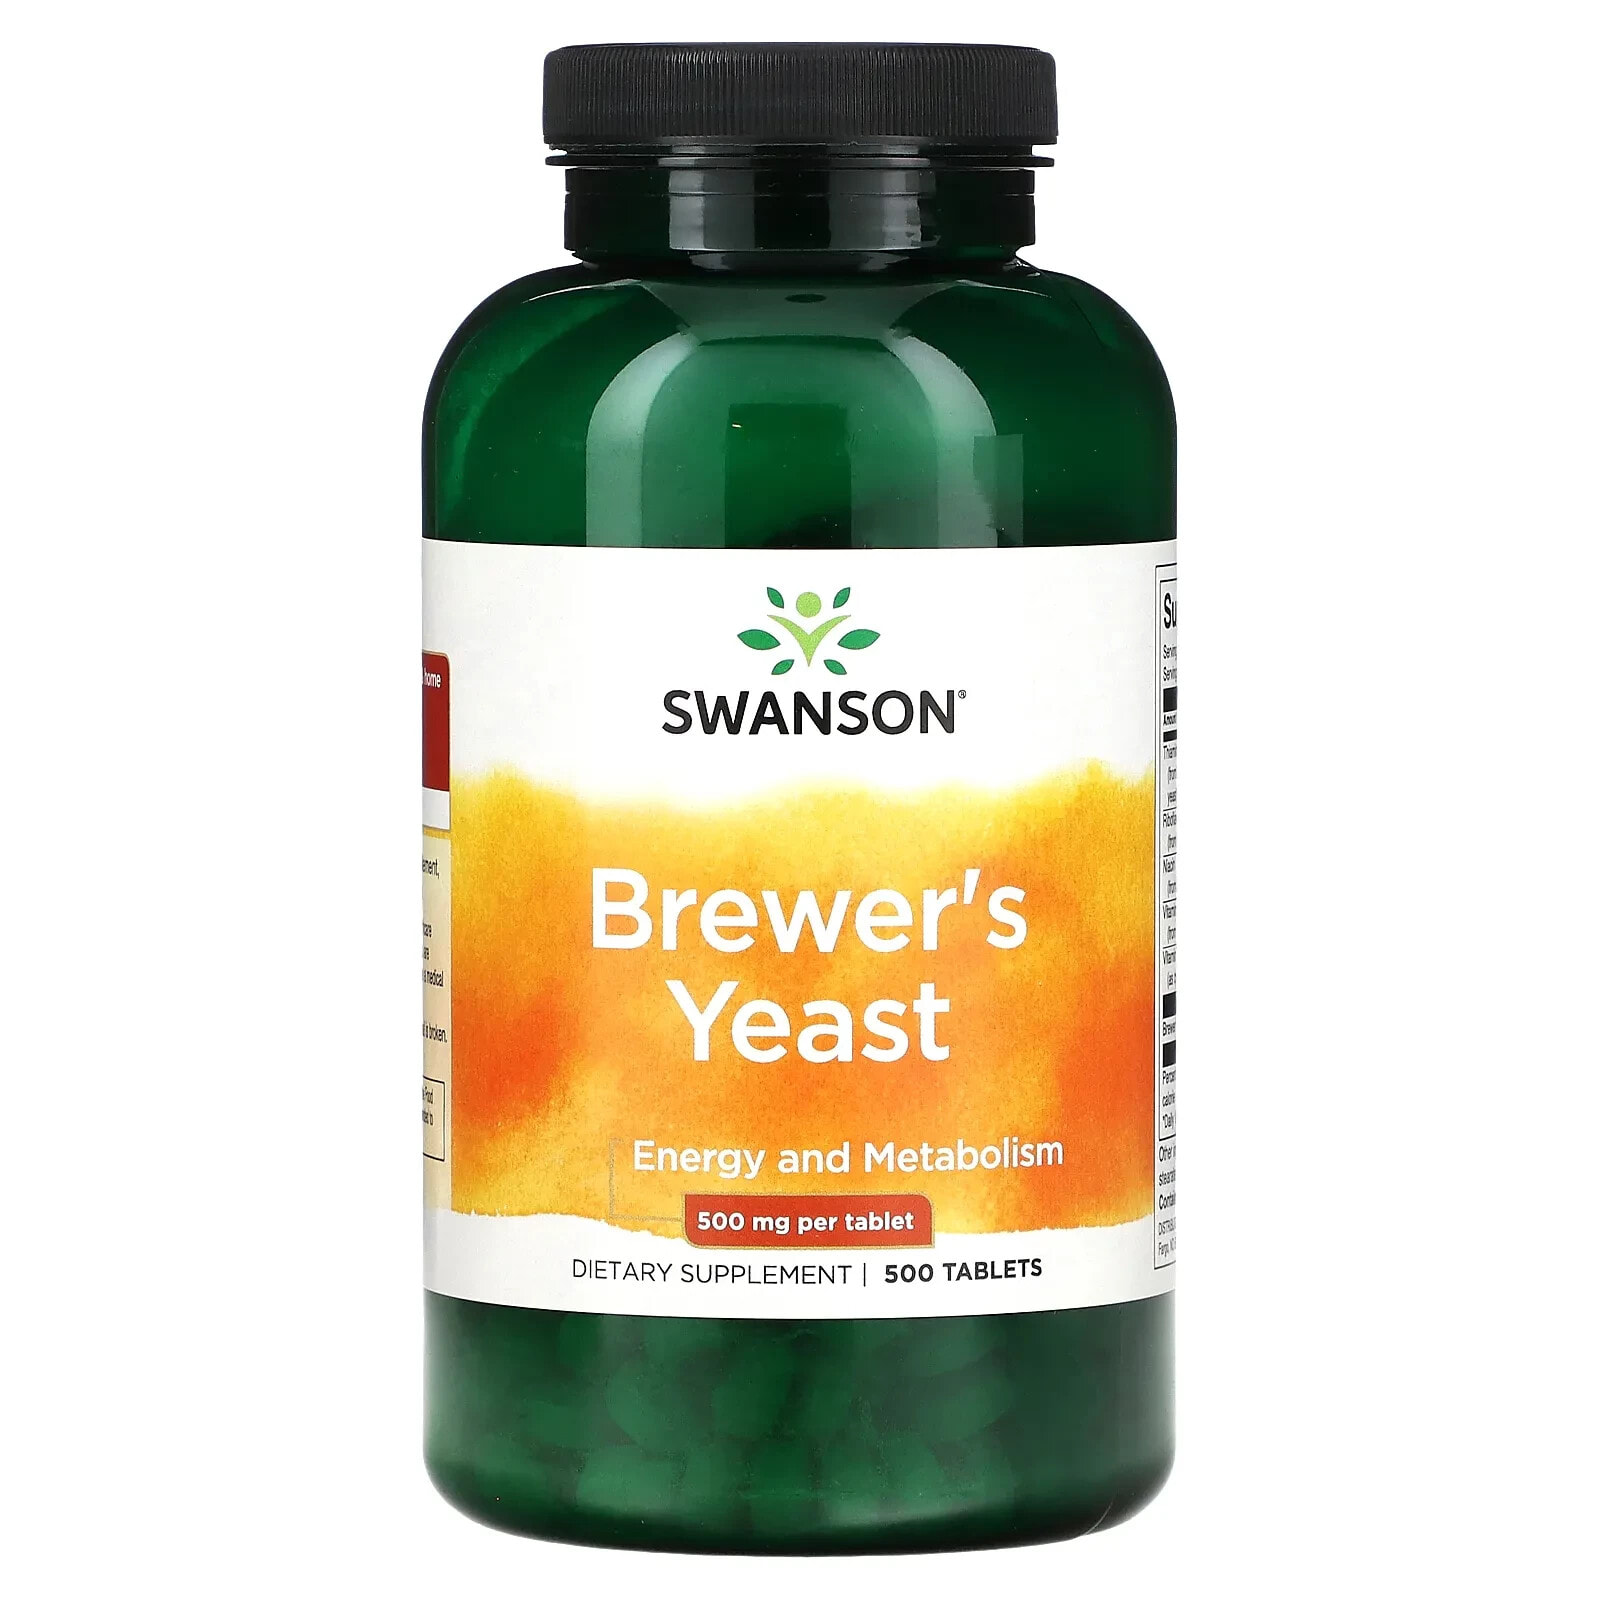 Brewer's Yeast, 500 mg, 500 Tablets